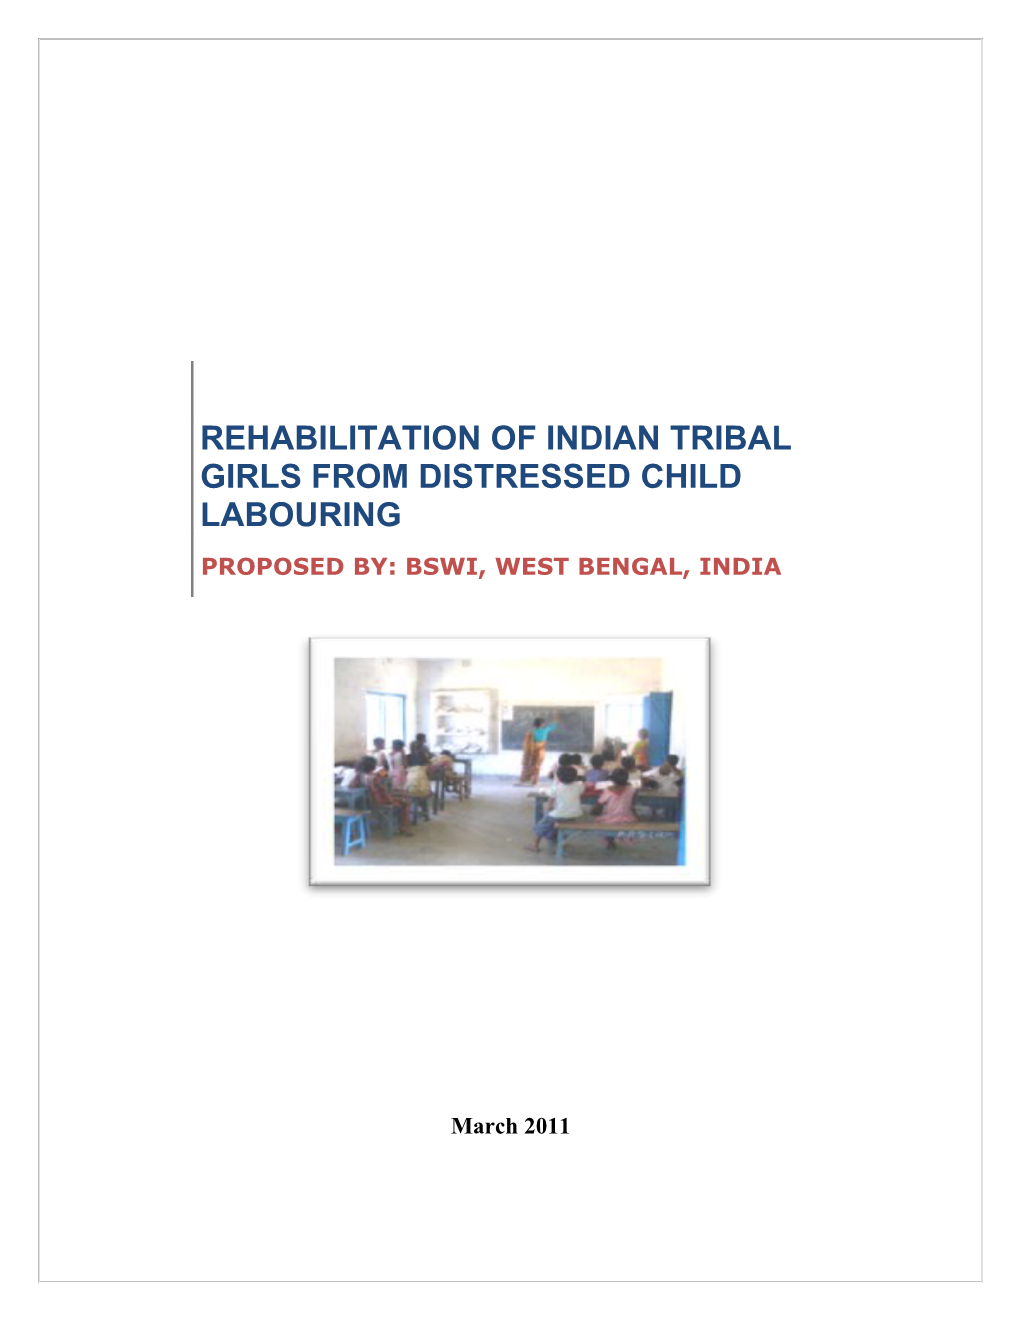 Rehabilitation of Indian Tribal Girls from Distressed Child Labouring